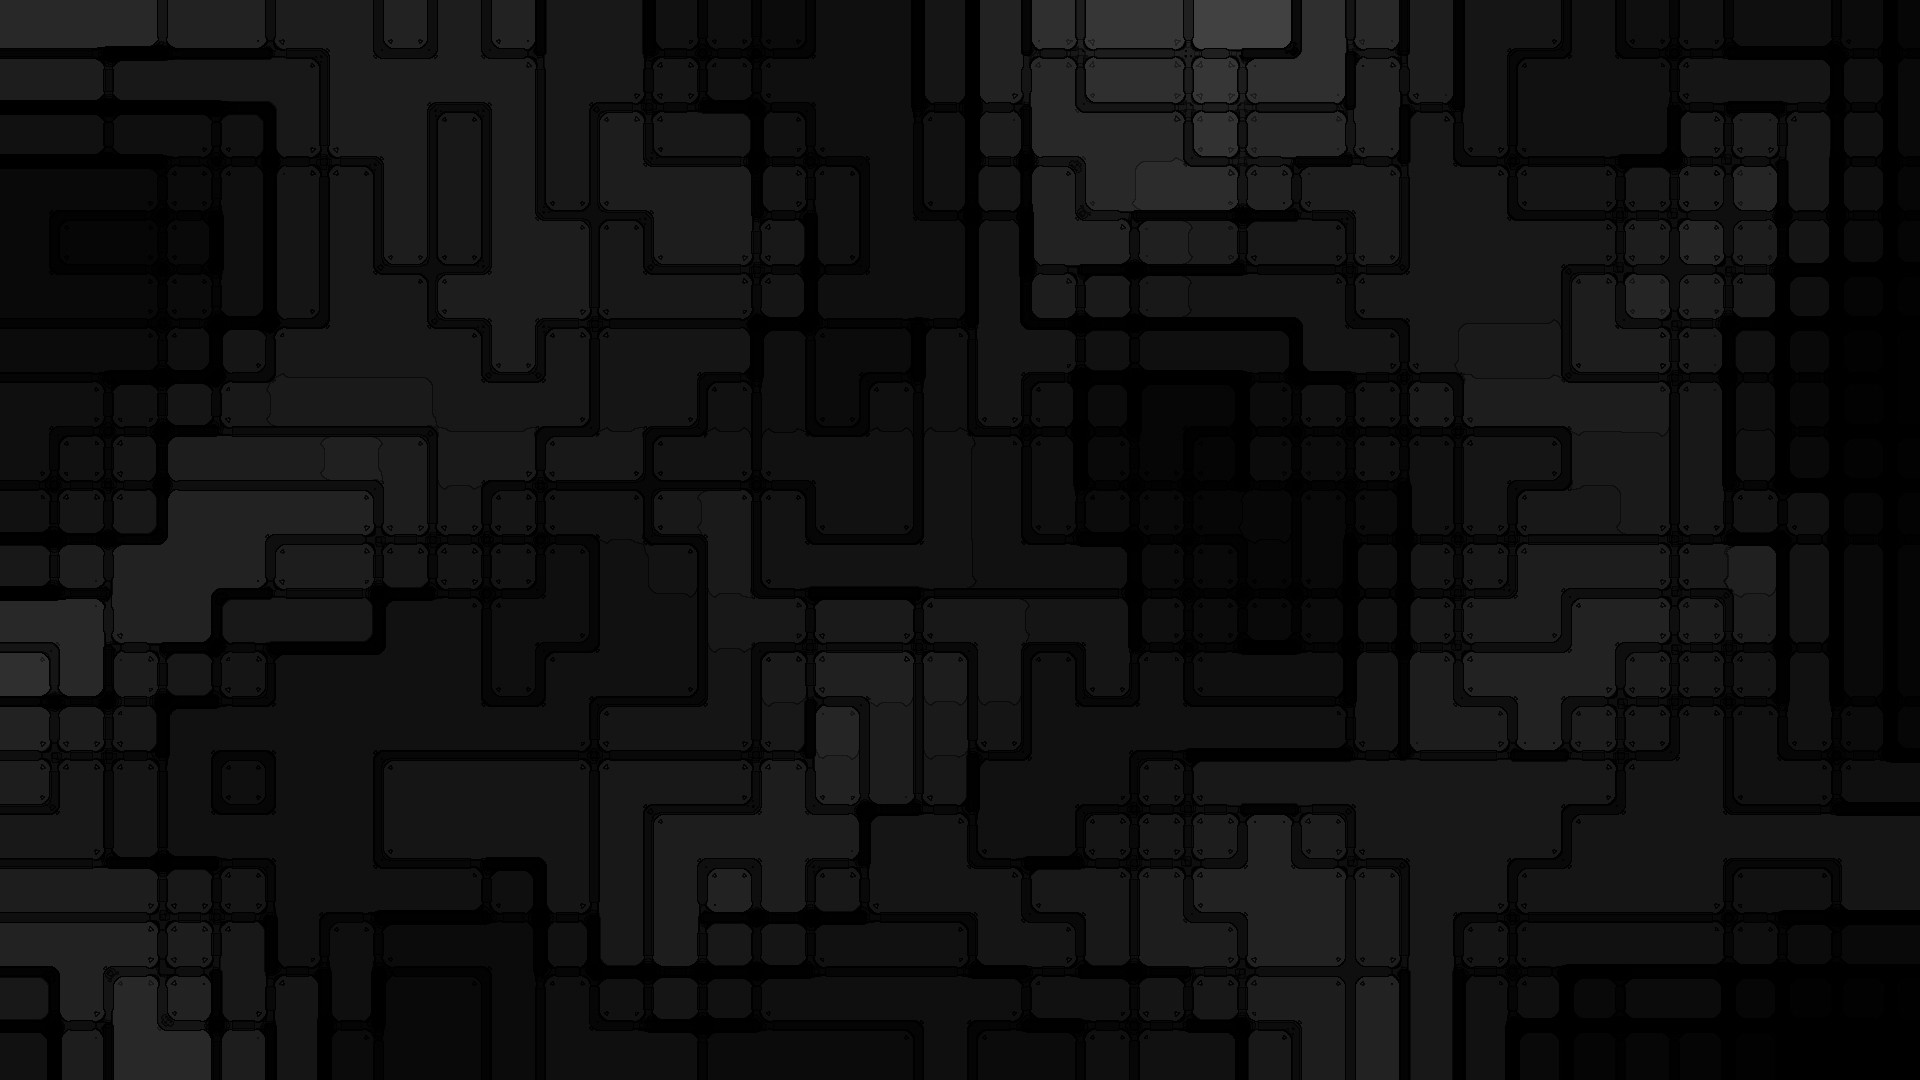 1920x1080 Free Dark Black Pattern Image For Window 9 http://wallpapers.ae/